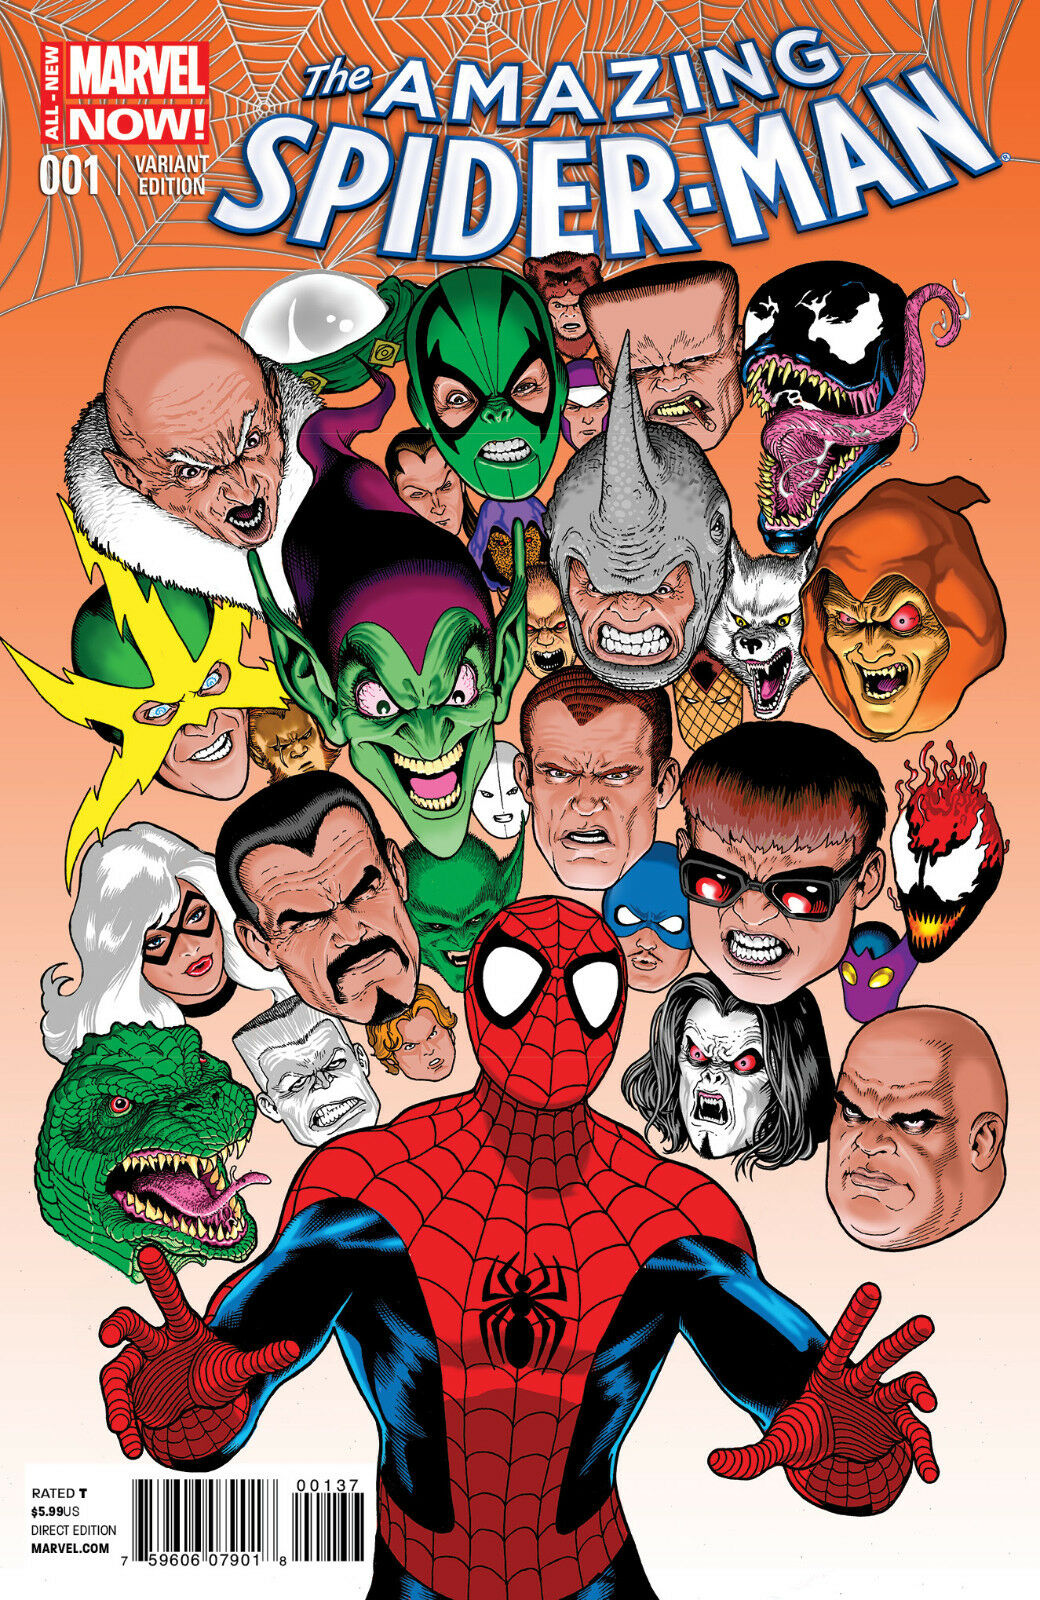 Amazing Spider-Man #1 (2014) Kevin Maguire Color Variant